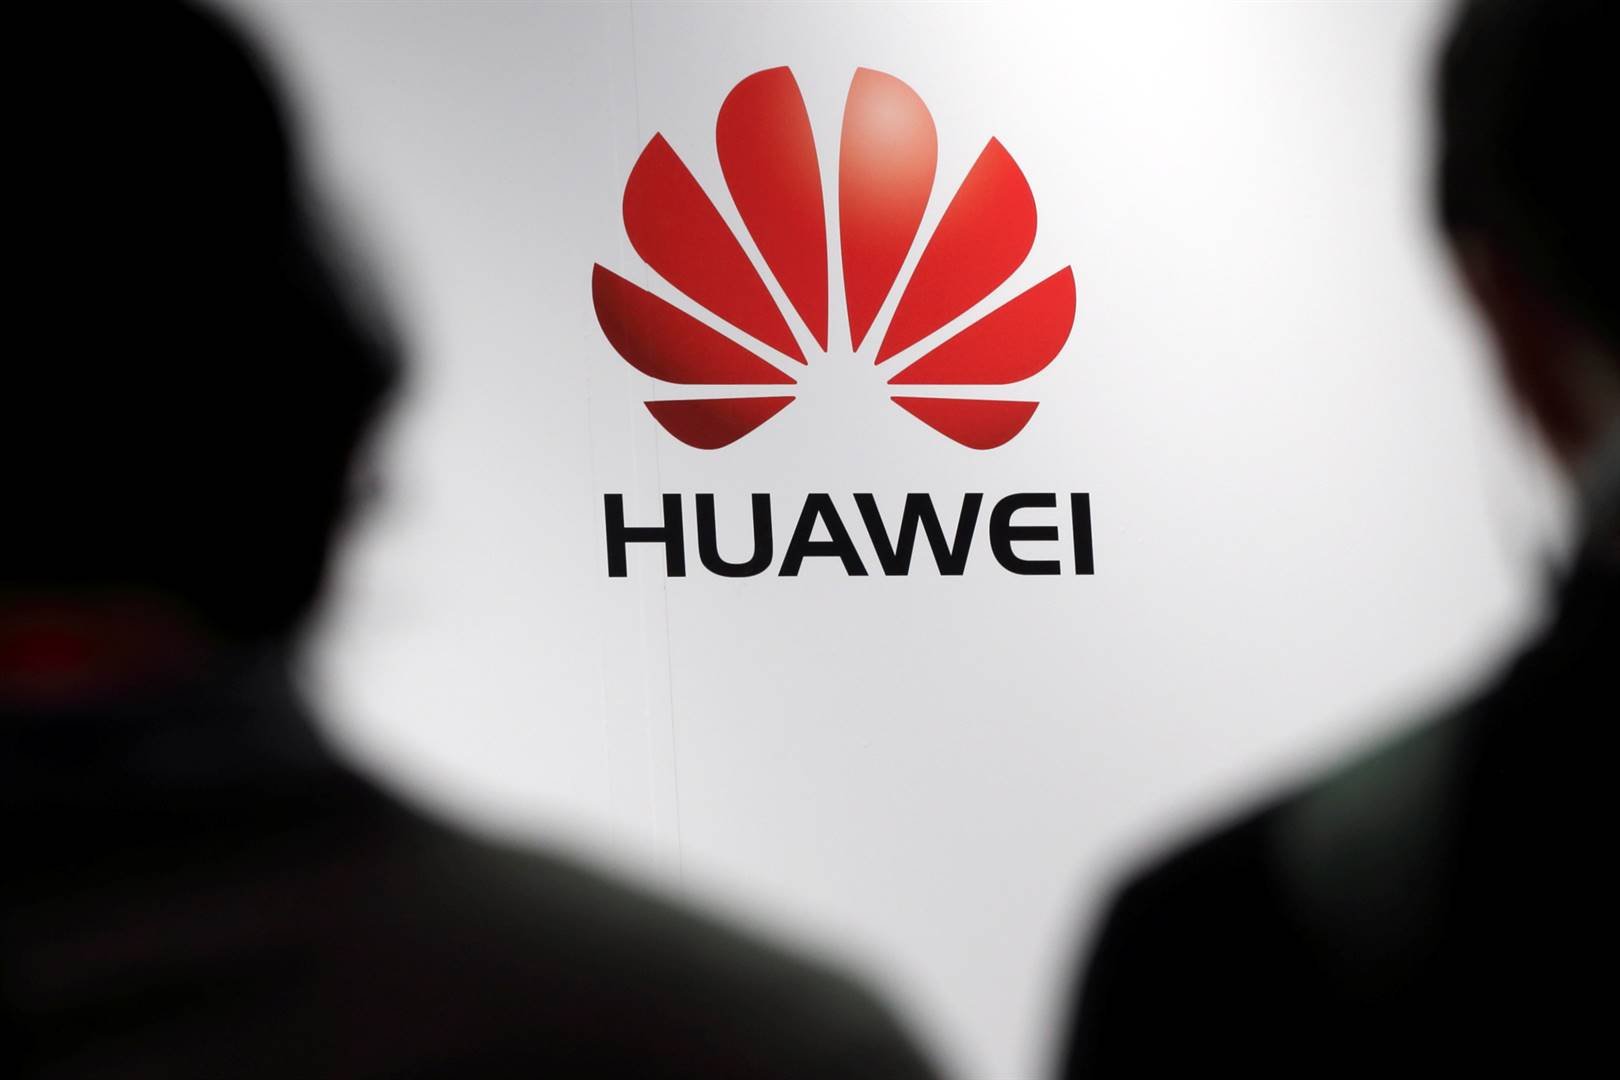 Don’t worry yet, says Huawei. You can still use your phone in South Africa. Picture: Philippe Wojazer/Reuters